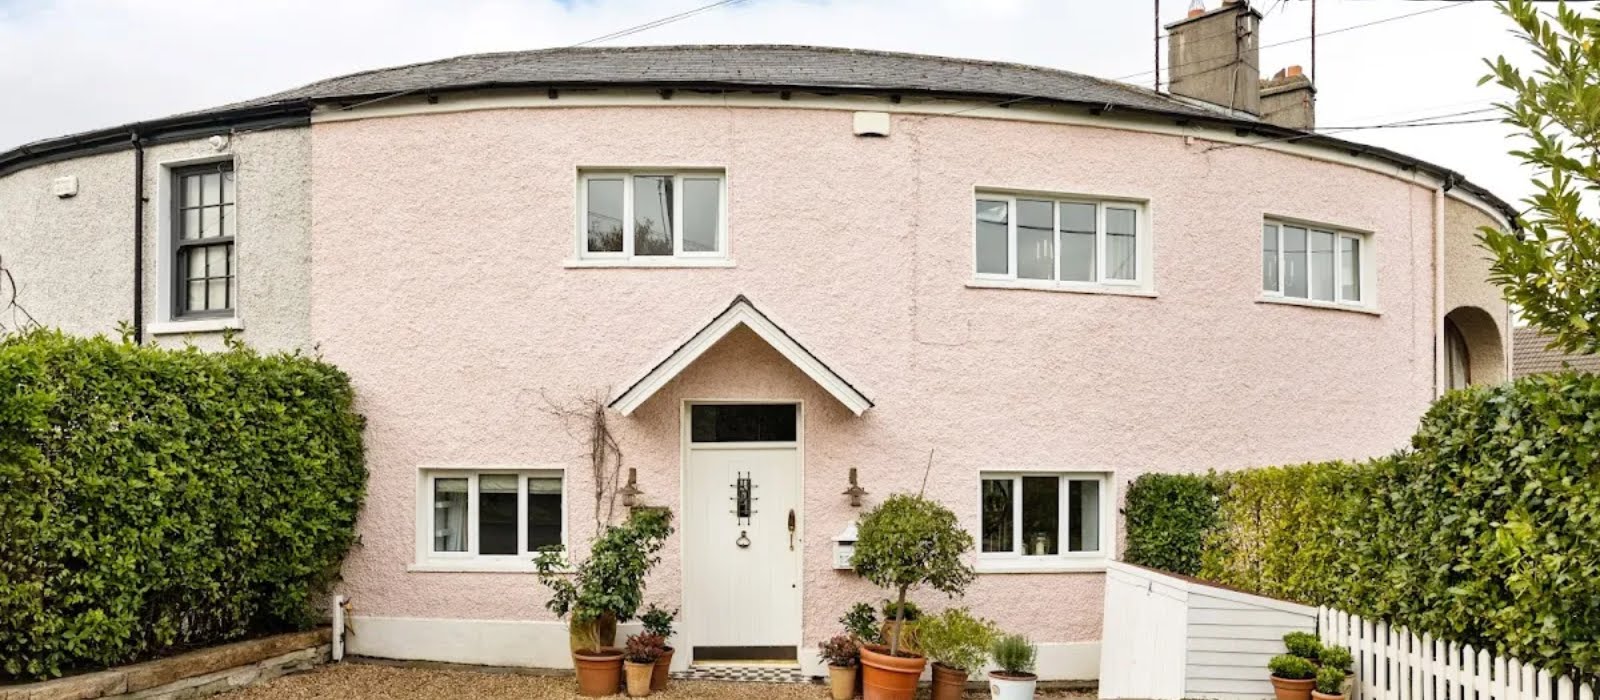 This unique Killiney home is on the market for €895,000